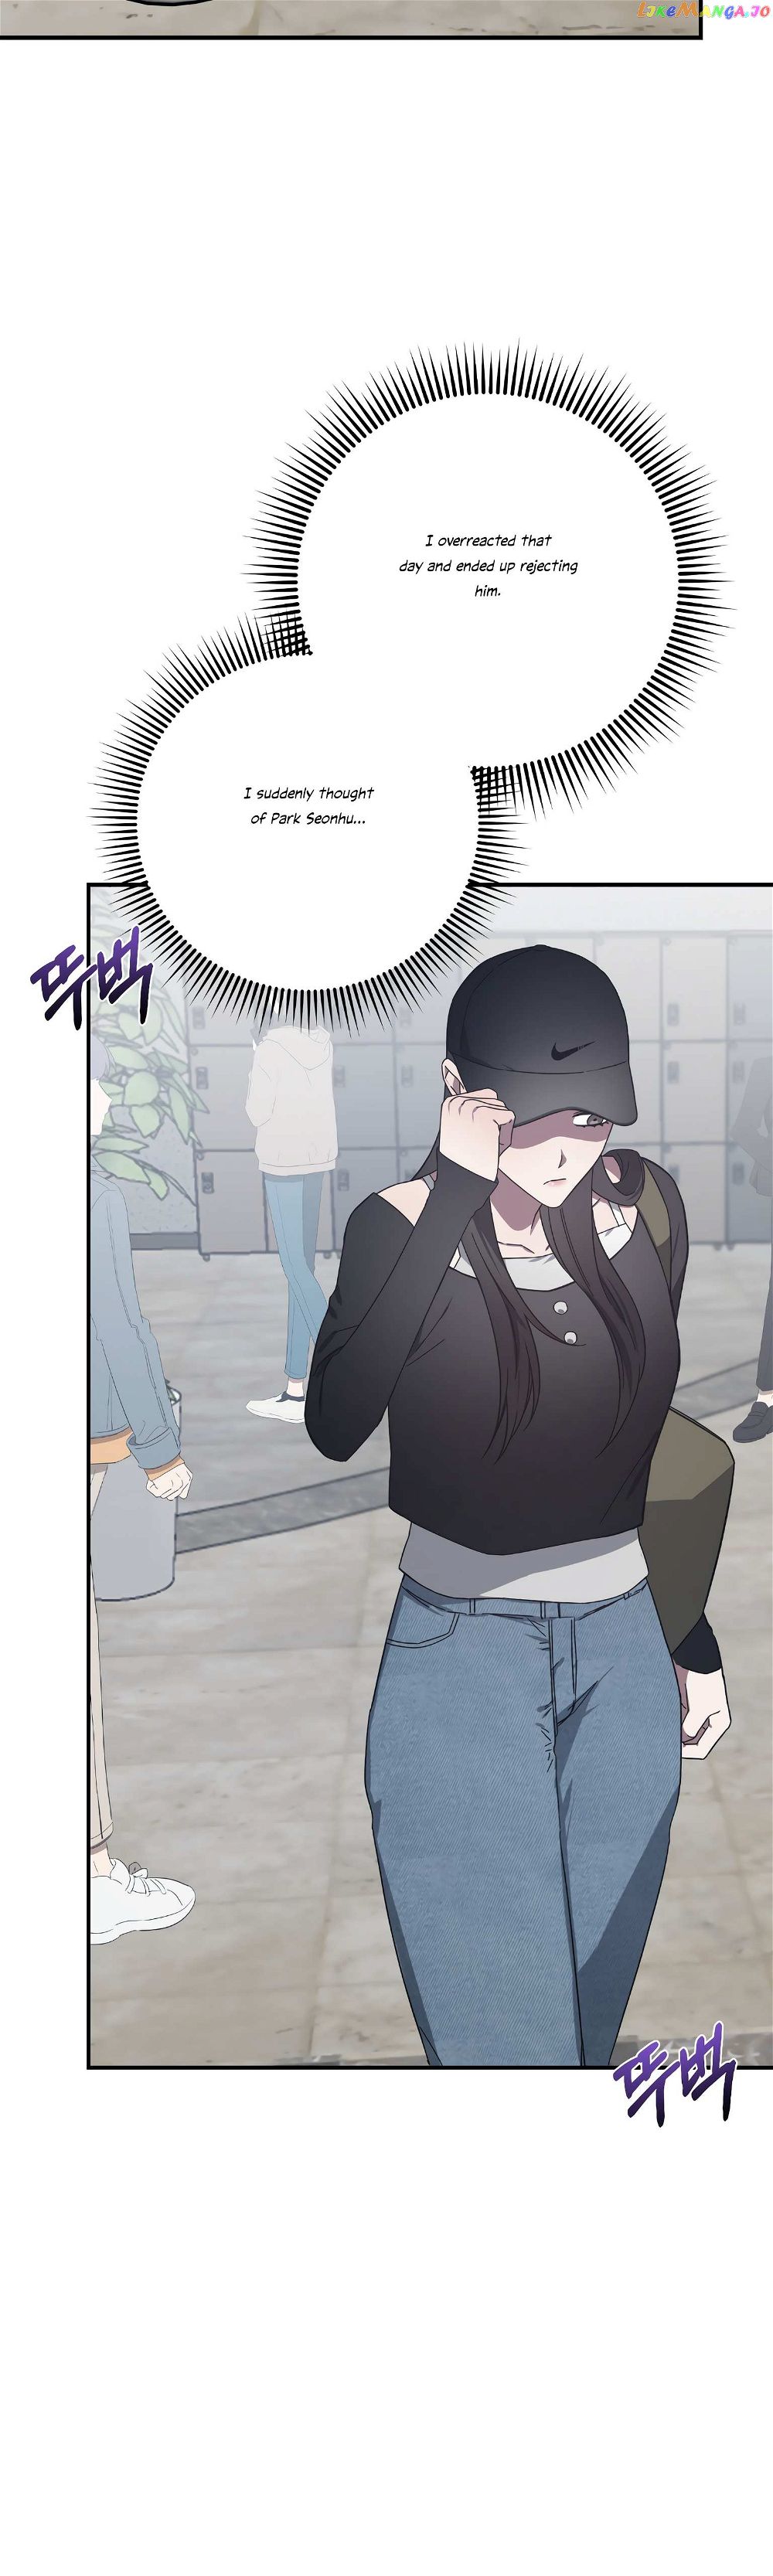 Mijeong’s Relationships chapter 27 - Page 21